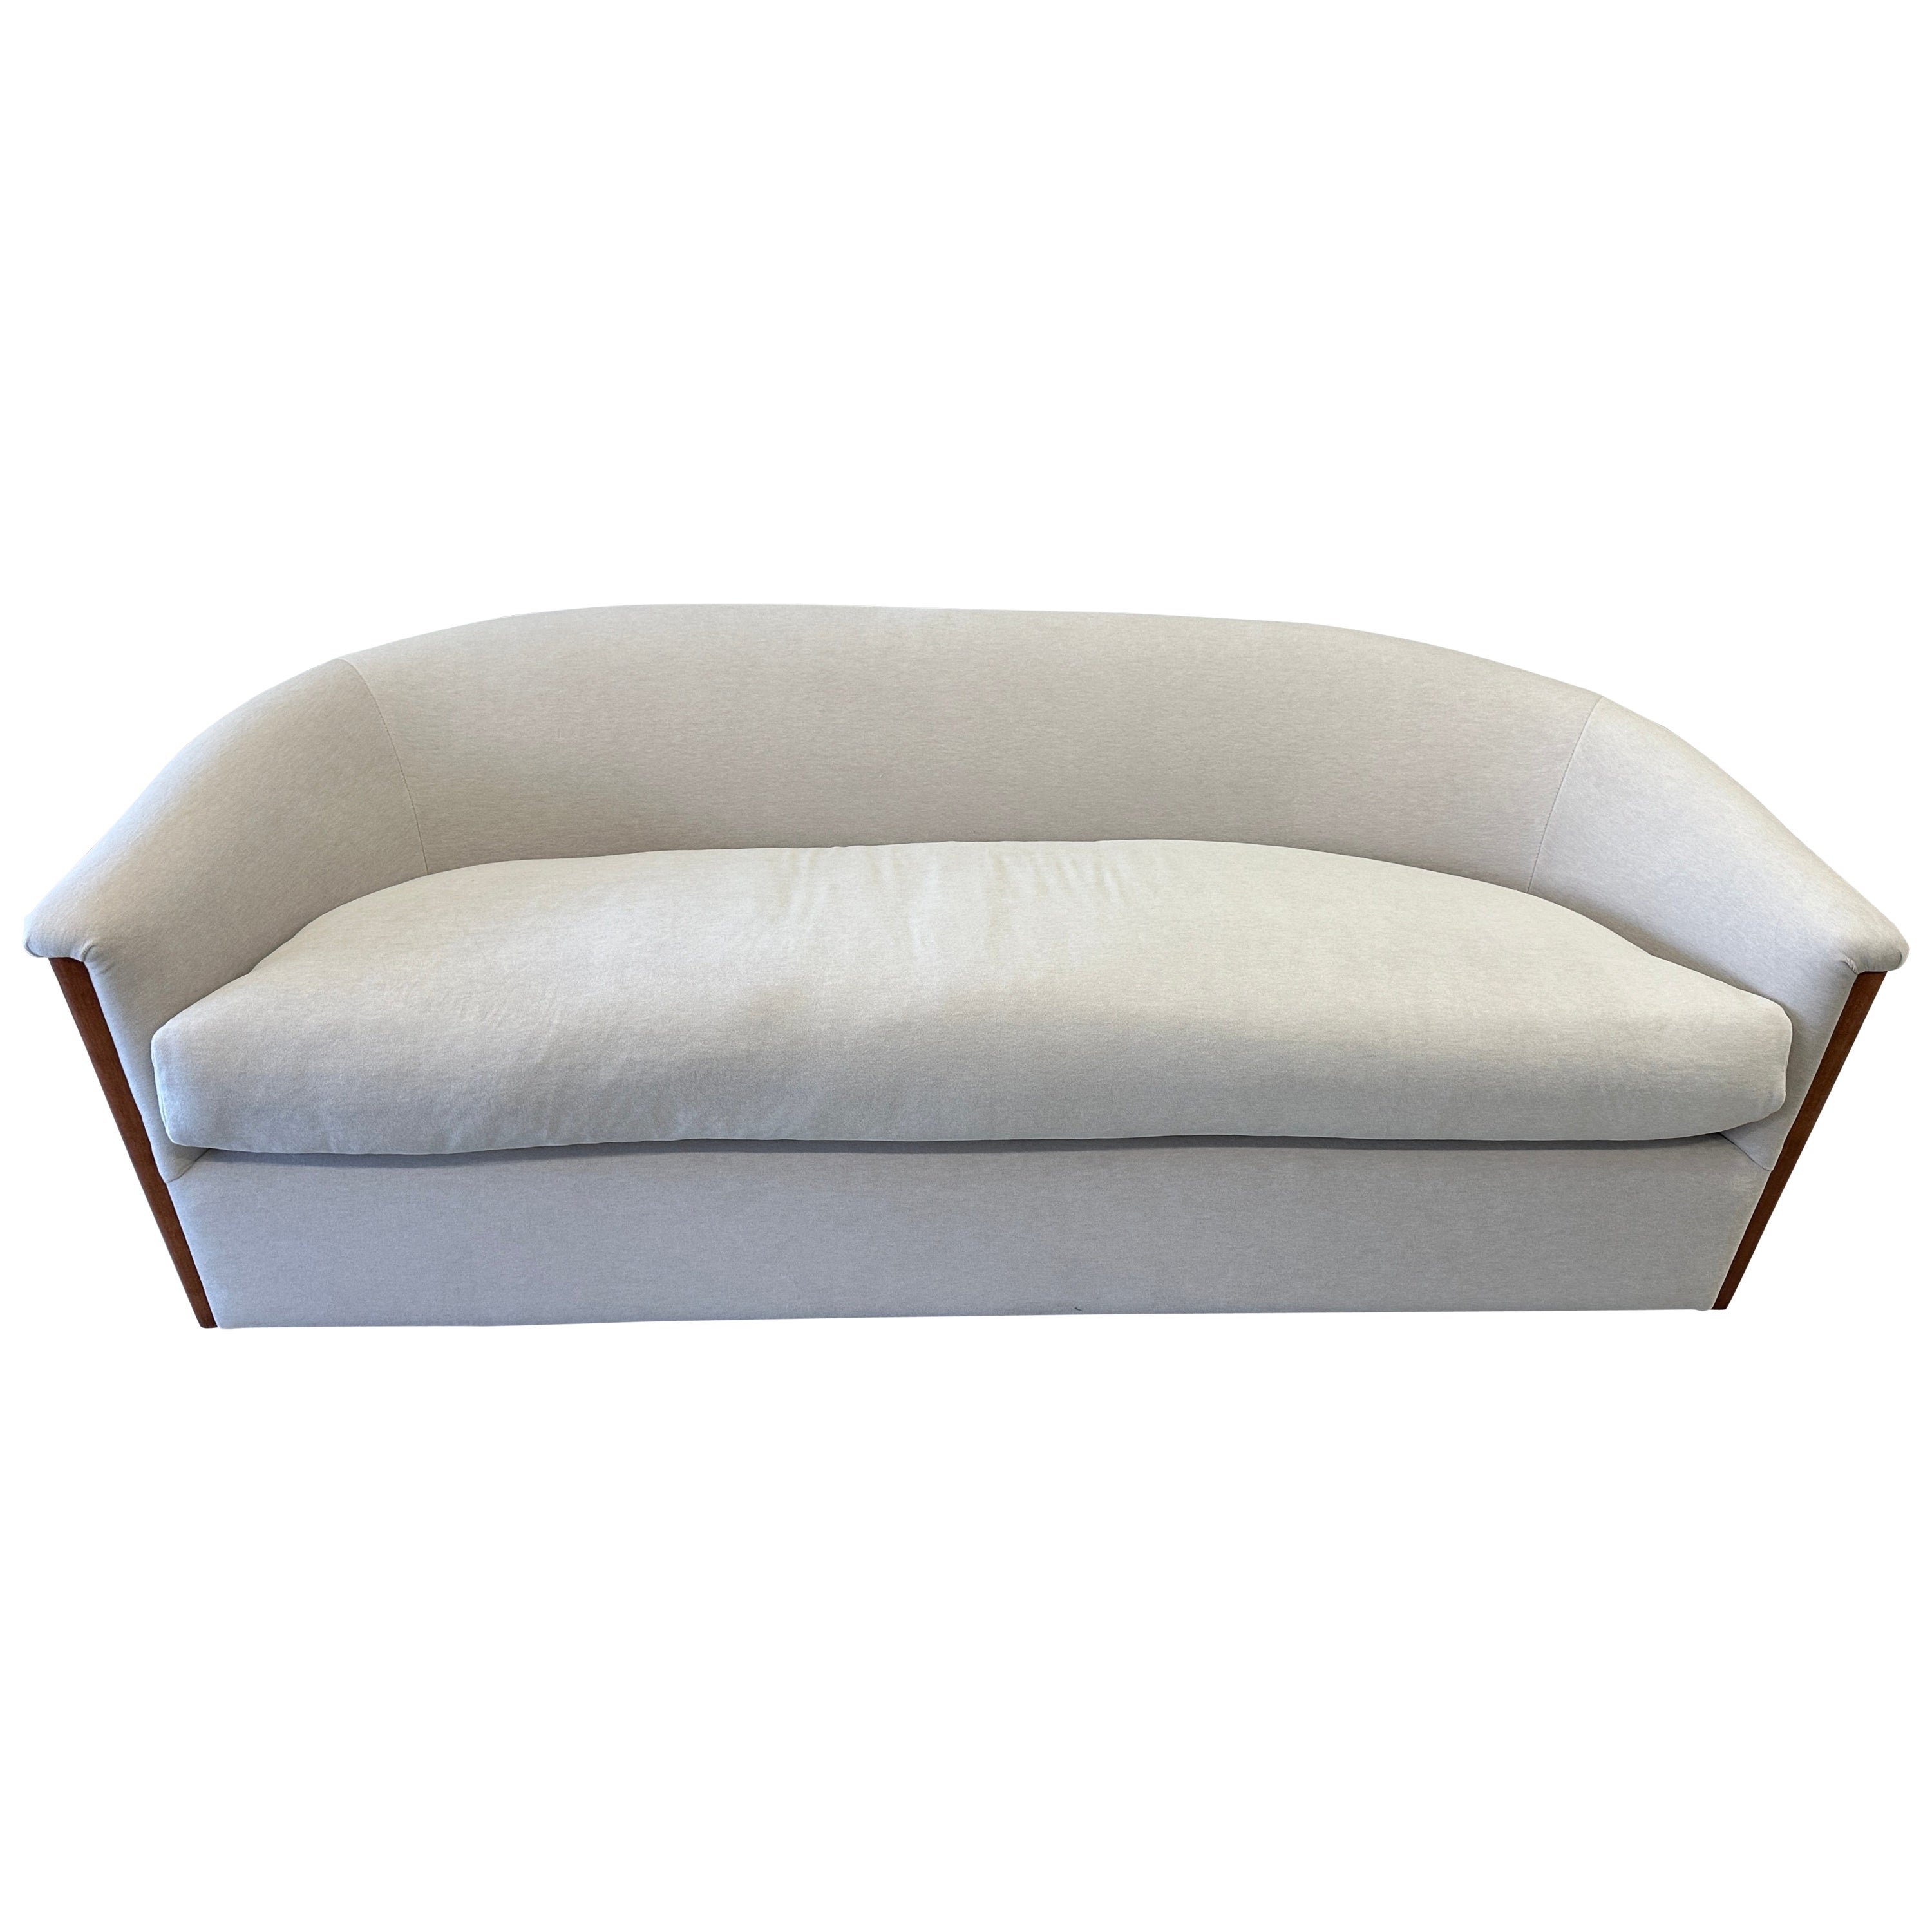 A beautiful and extremely comfortable sofa by Sally Siskin Lewis , J Robert Scott. We have had it redone in a sumptuous Mario Sirtori Alpaca/Cotton/Wool/Poly blend fabric hat is so soft to the touch. The cushion is down and soft and giving. The wood